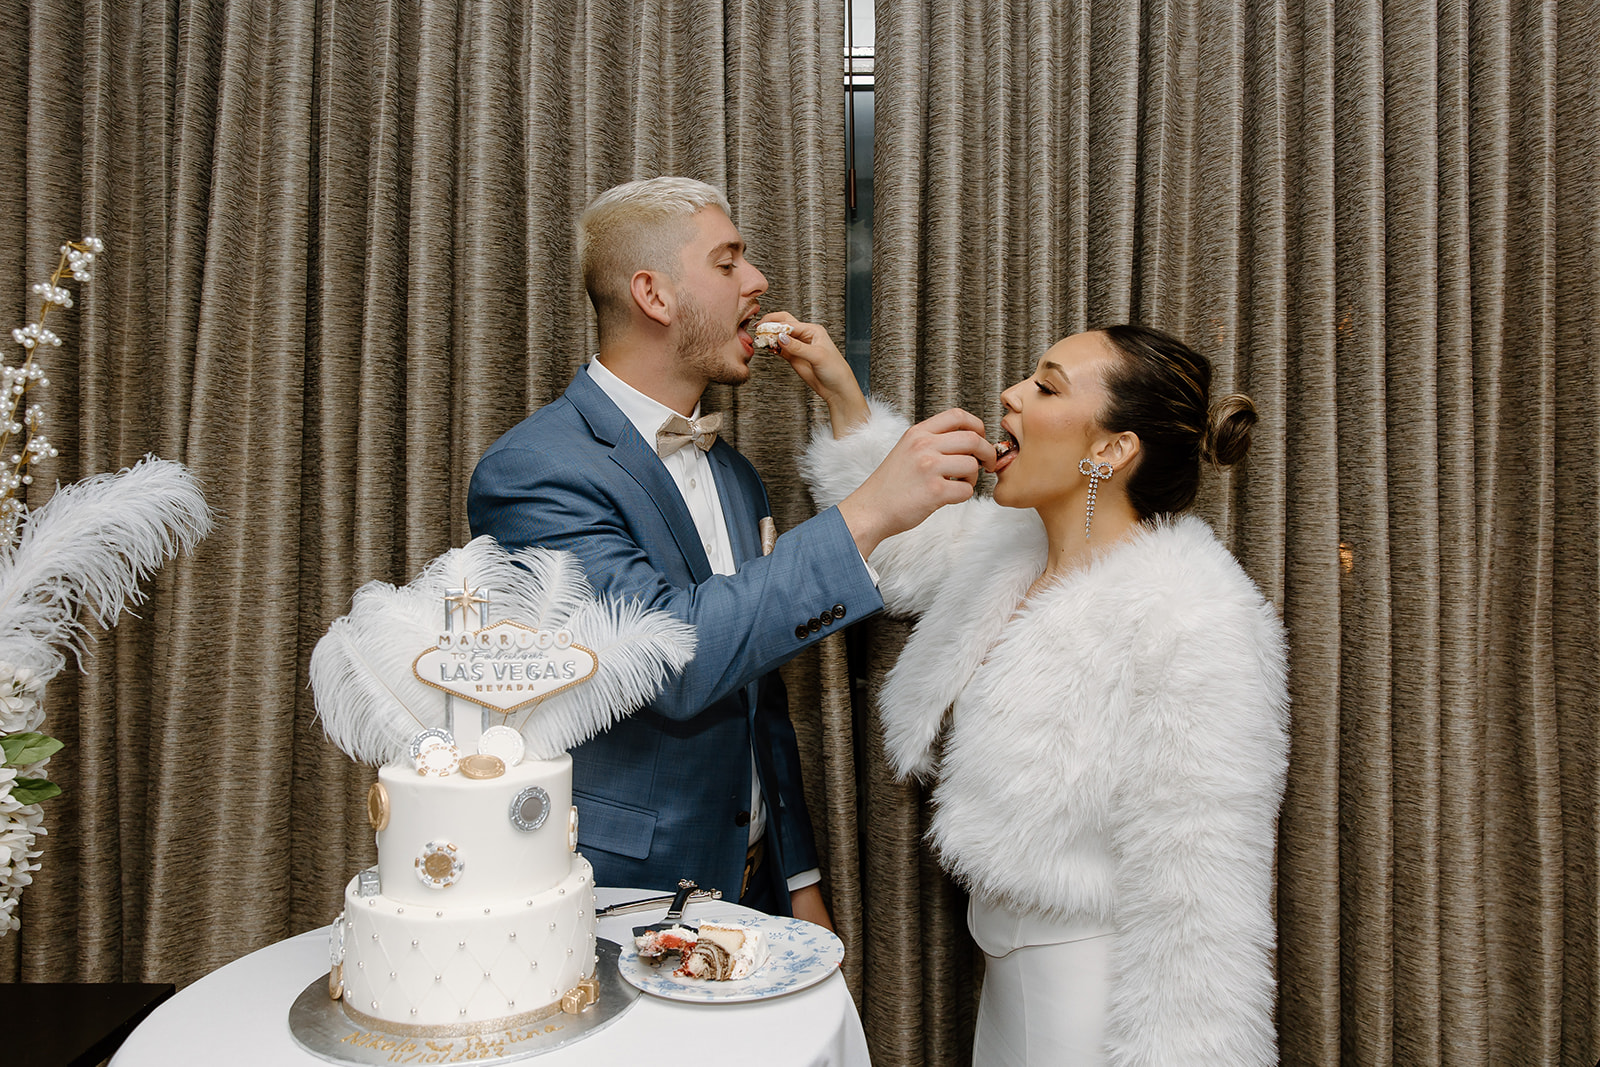 Bride and groom feed each other cake